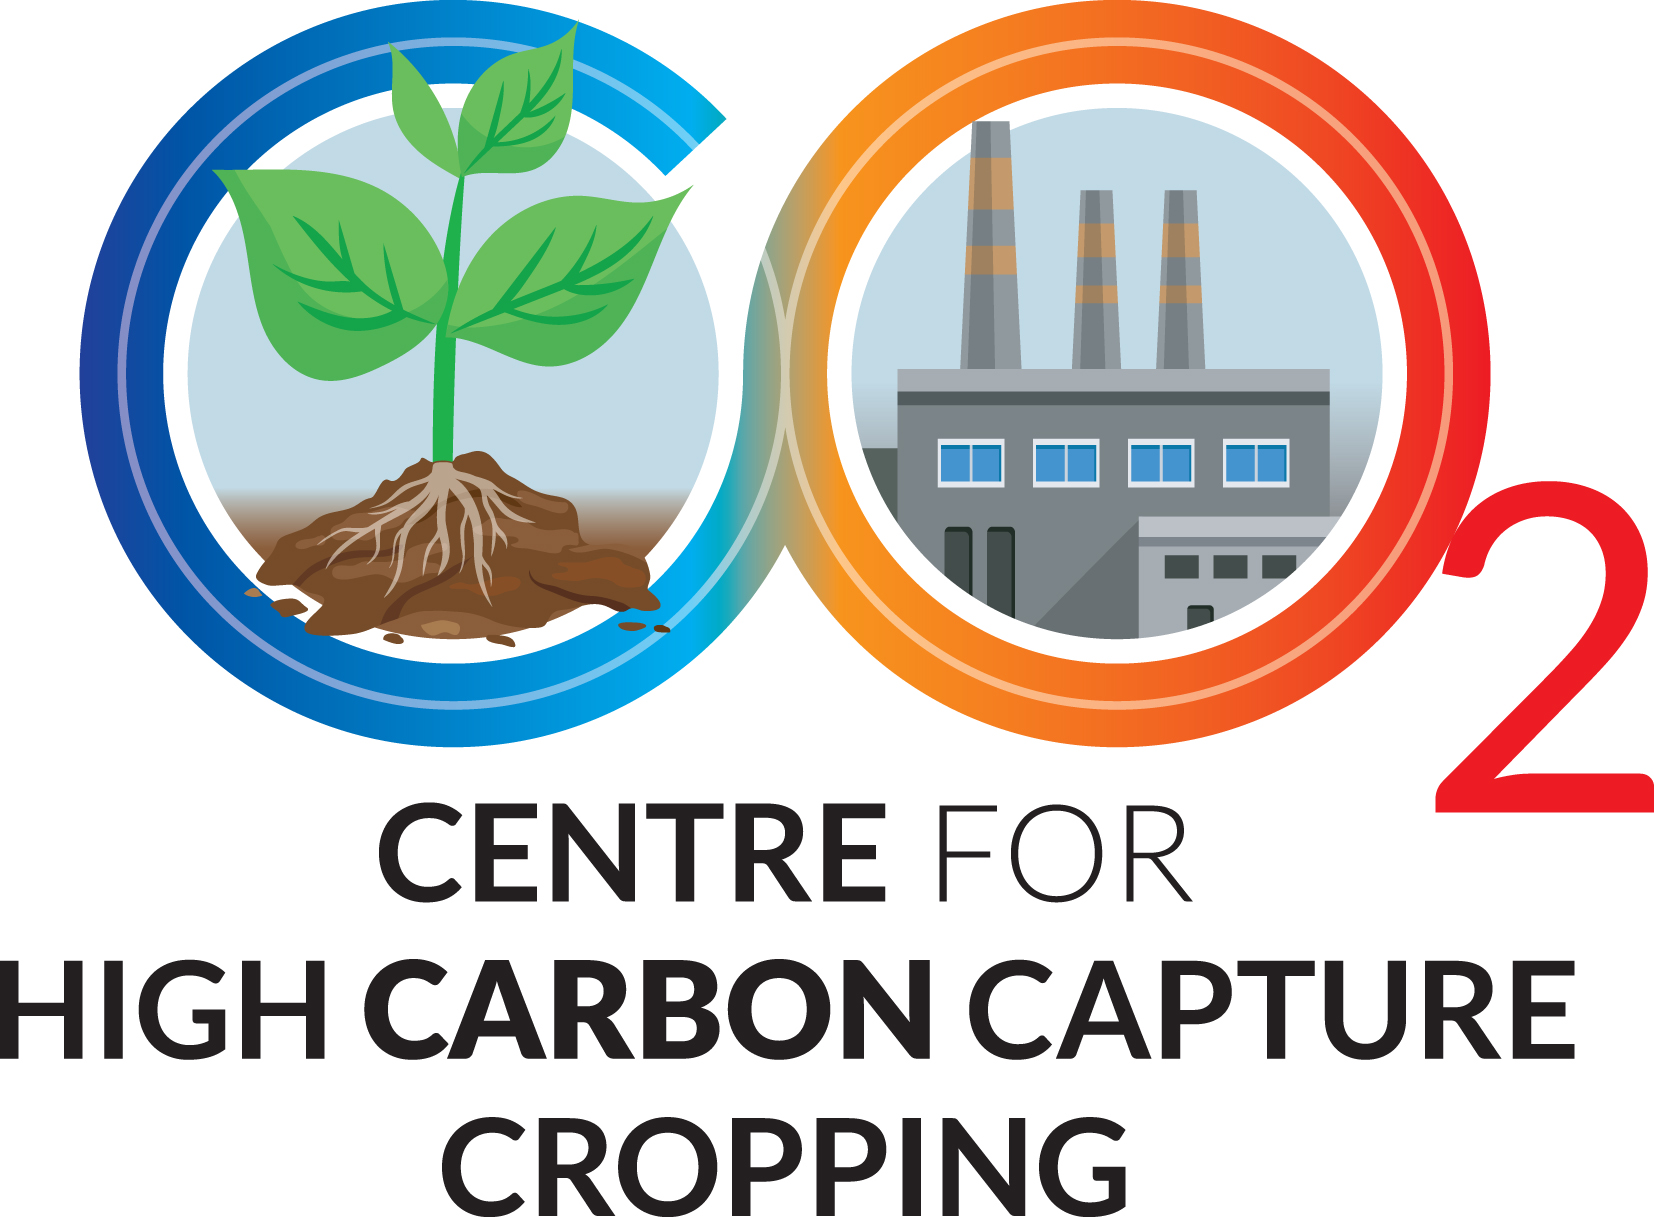 The Centre for High Carbon Cropping logo